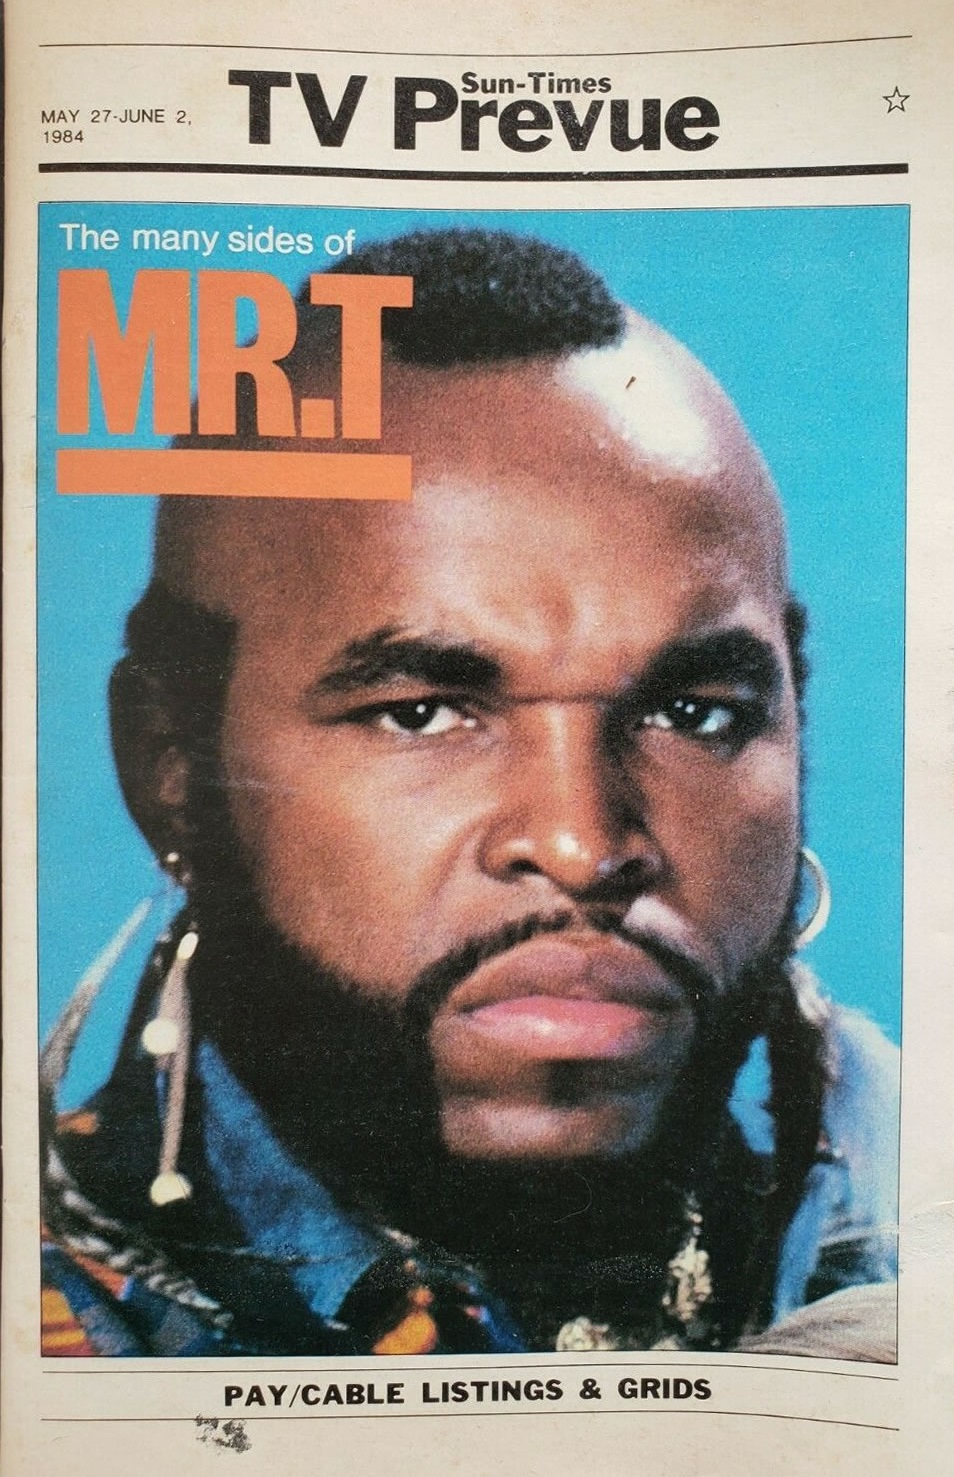 Happy Birthday to Chicago\s own Mr T.  
Born on this day in 1969
Chicago Sun-Times TV Prevue.  May 27 - June 2, 1984 